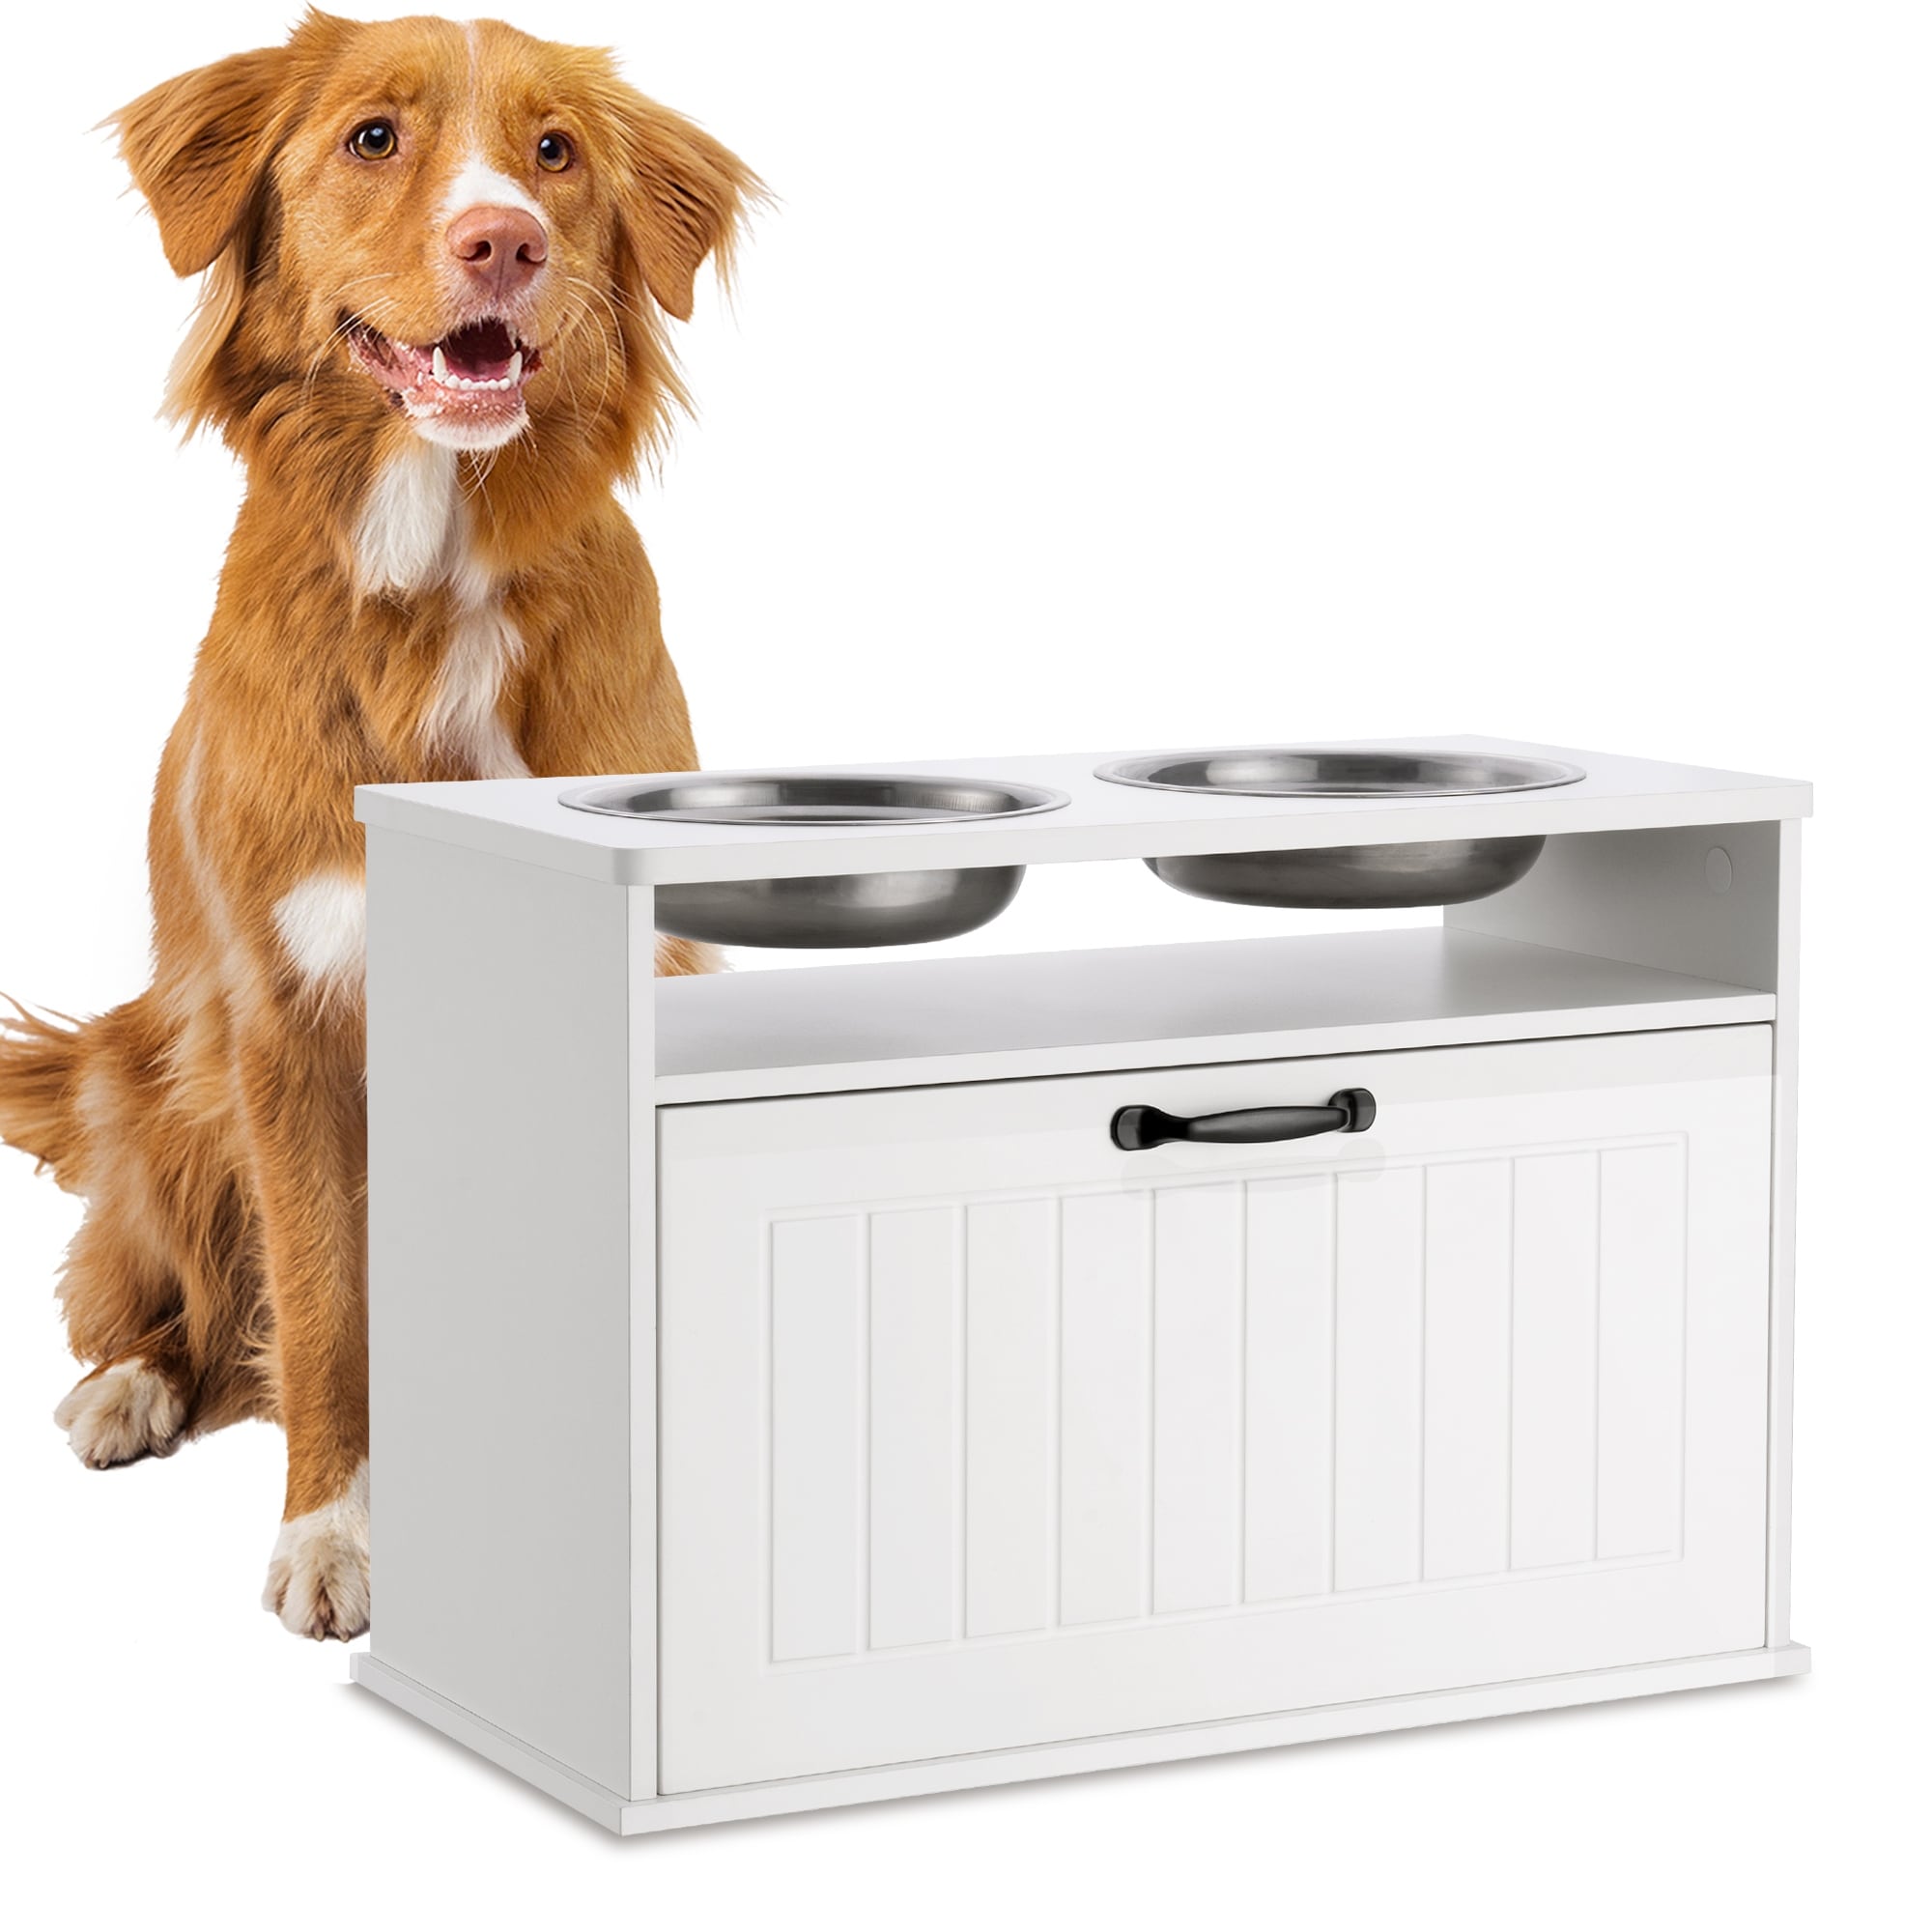 https://ak1.ostkcdn.com/images/products/is/images/direct/f96305ba2b71c31c877c0cd5696d62cd8d5676a3/Elevated-Dog-Feeding-Station-with-Storage-with-2-Stainless-Steel-Bowls.jpg